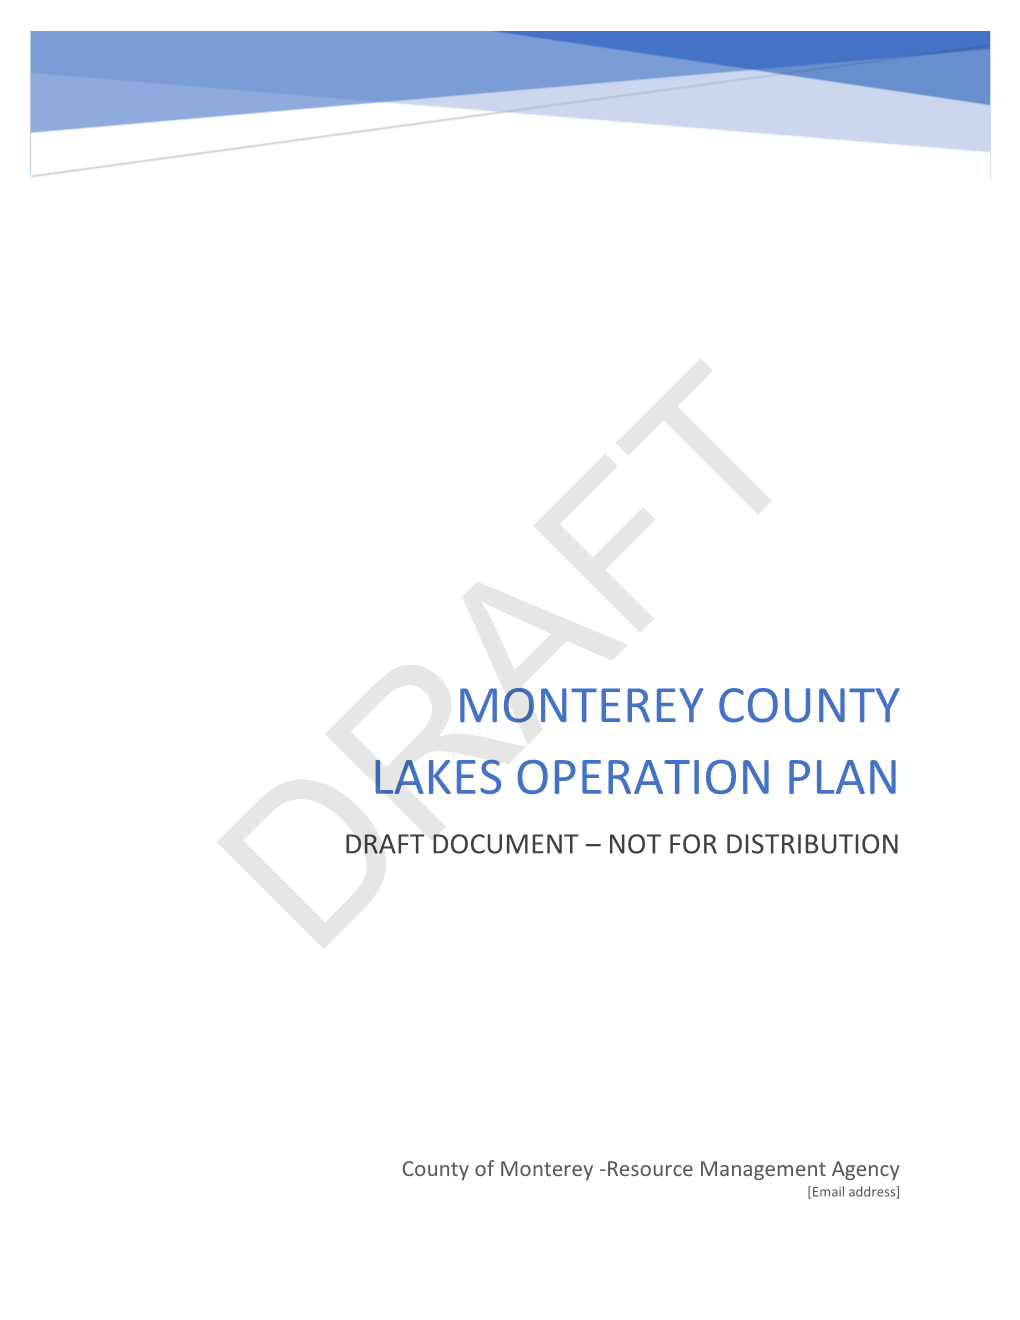 Monterey County Lakes Operation Plan Draft Document – Not for Distribution Draft